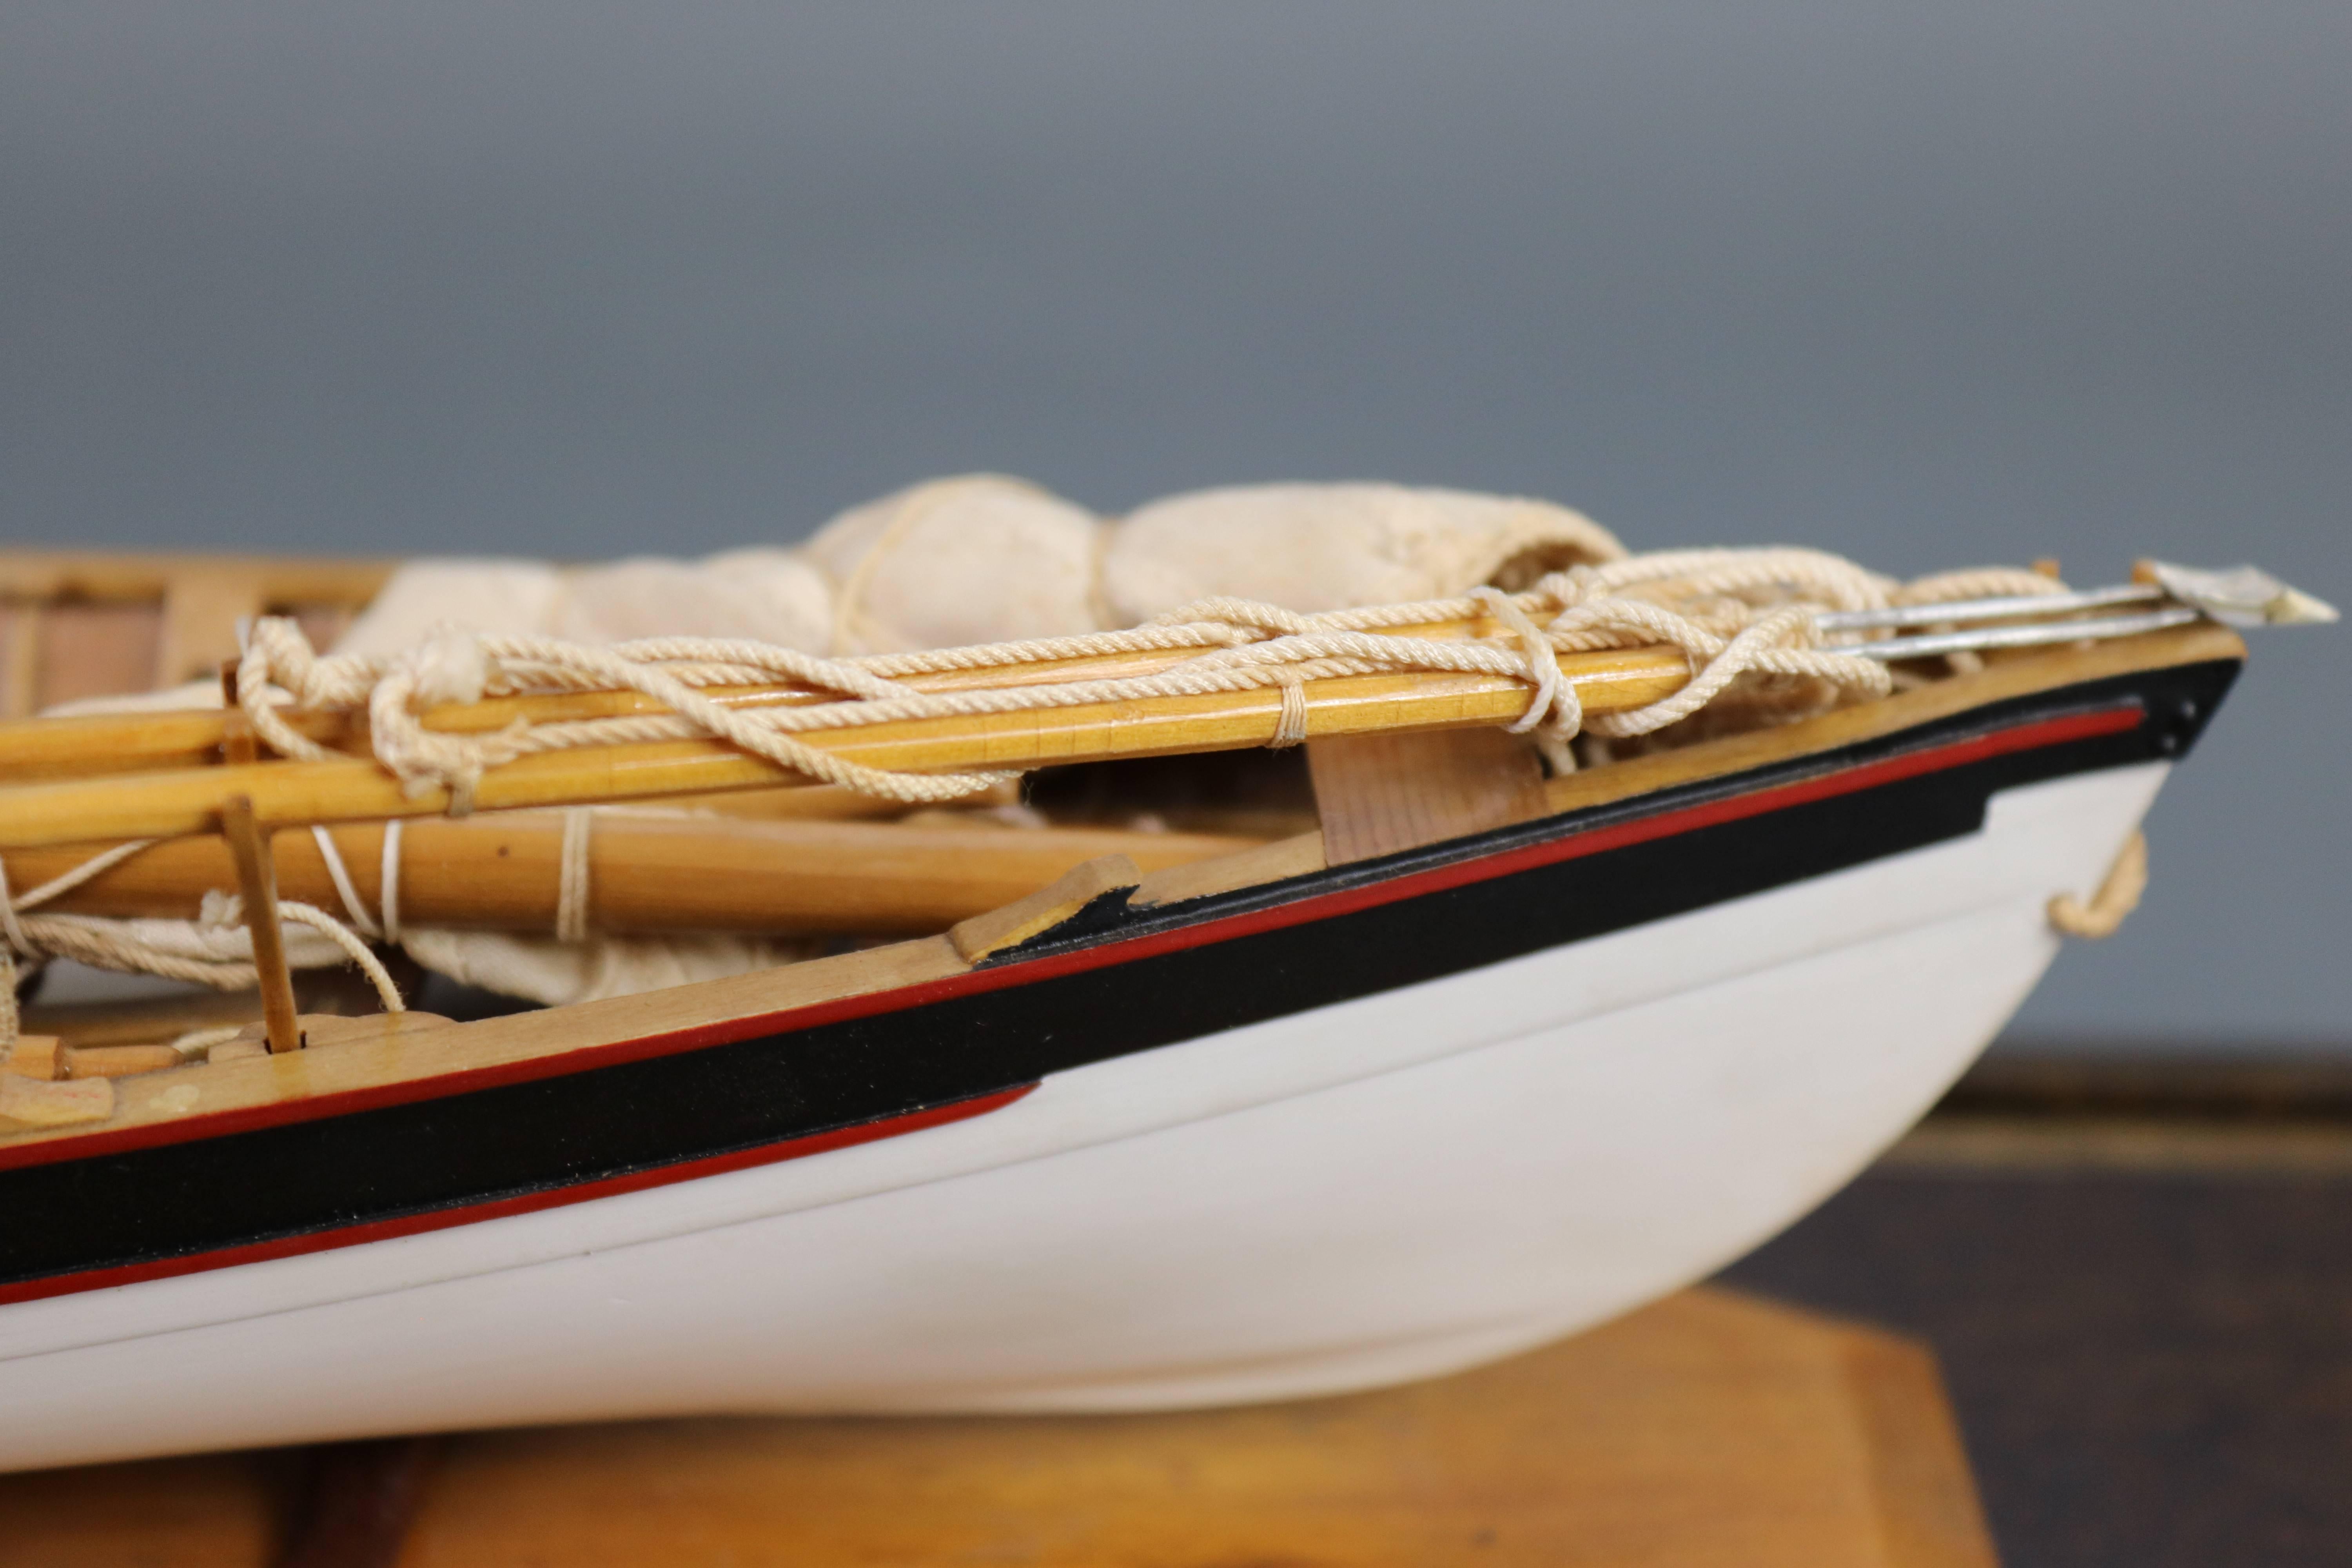 Expertly crafted model with ribs, planks, floorboards, oars, lances, harpoons, and etc. Fitted to an inlaid display case. Dimensions: 24" L x 8" W x 9" H.